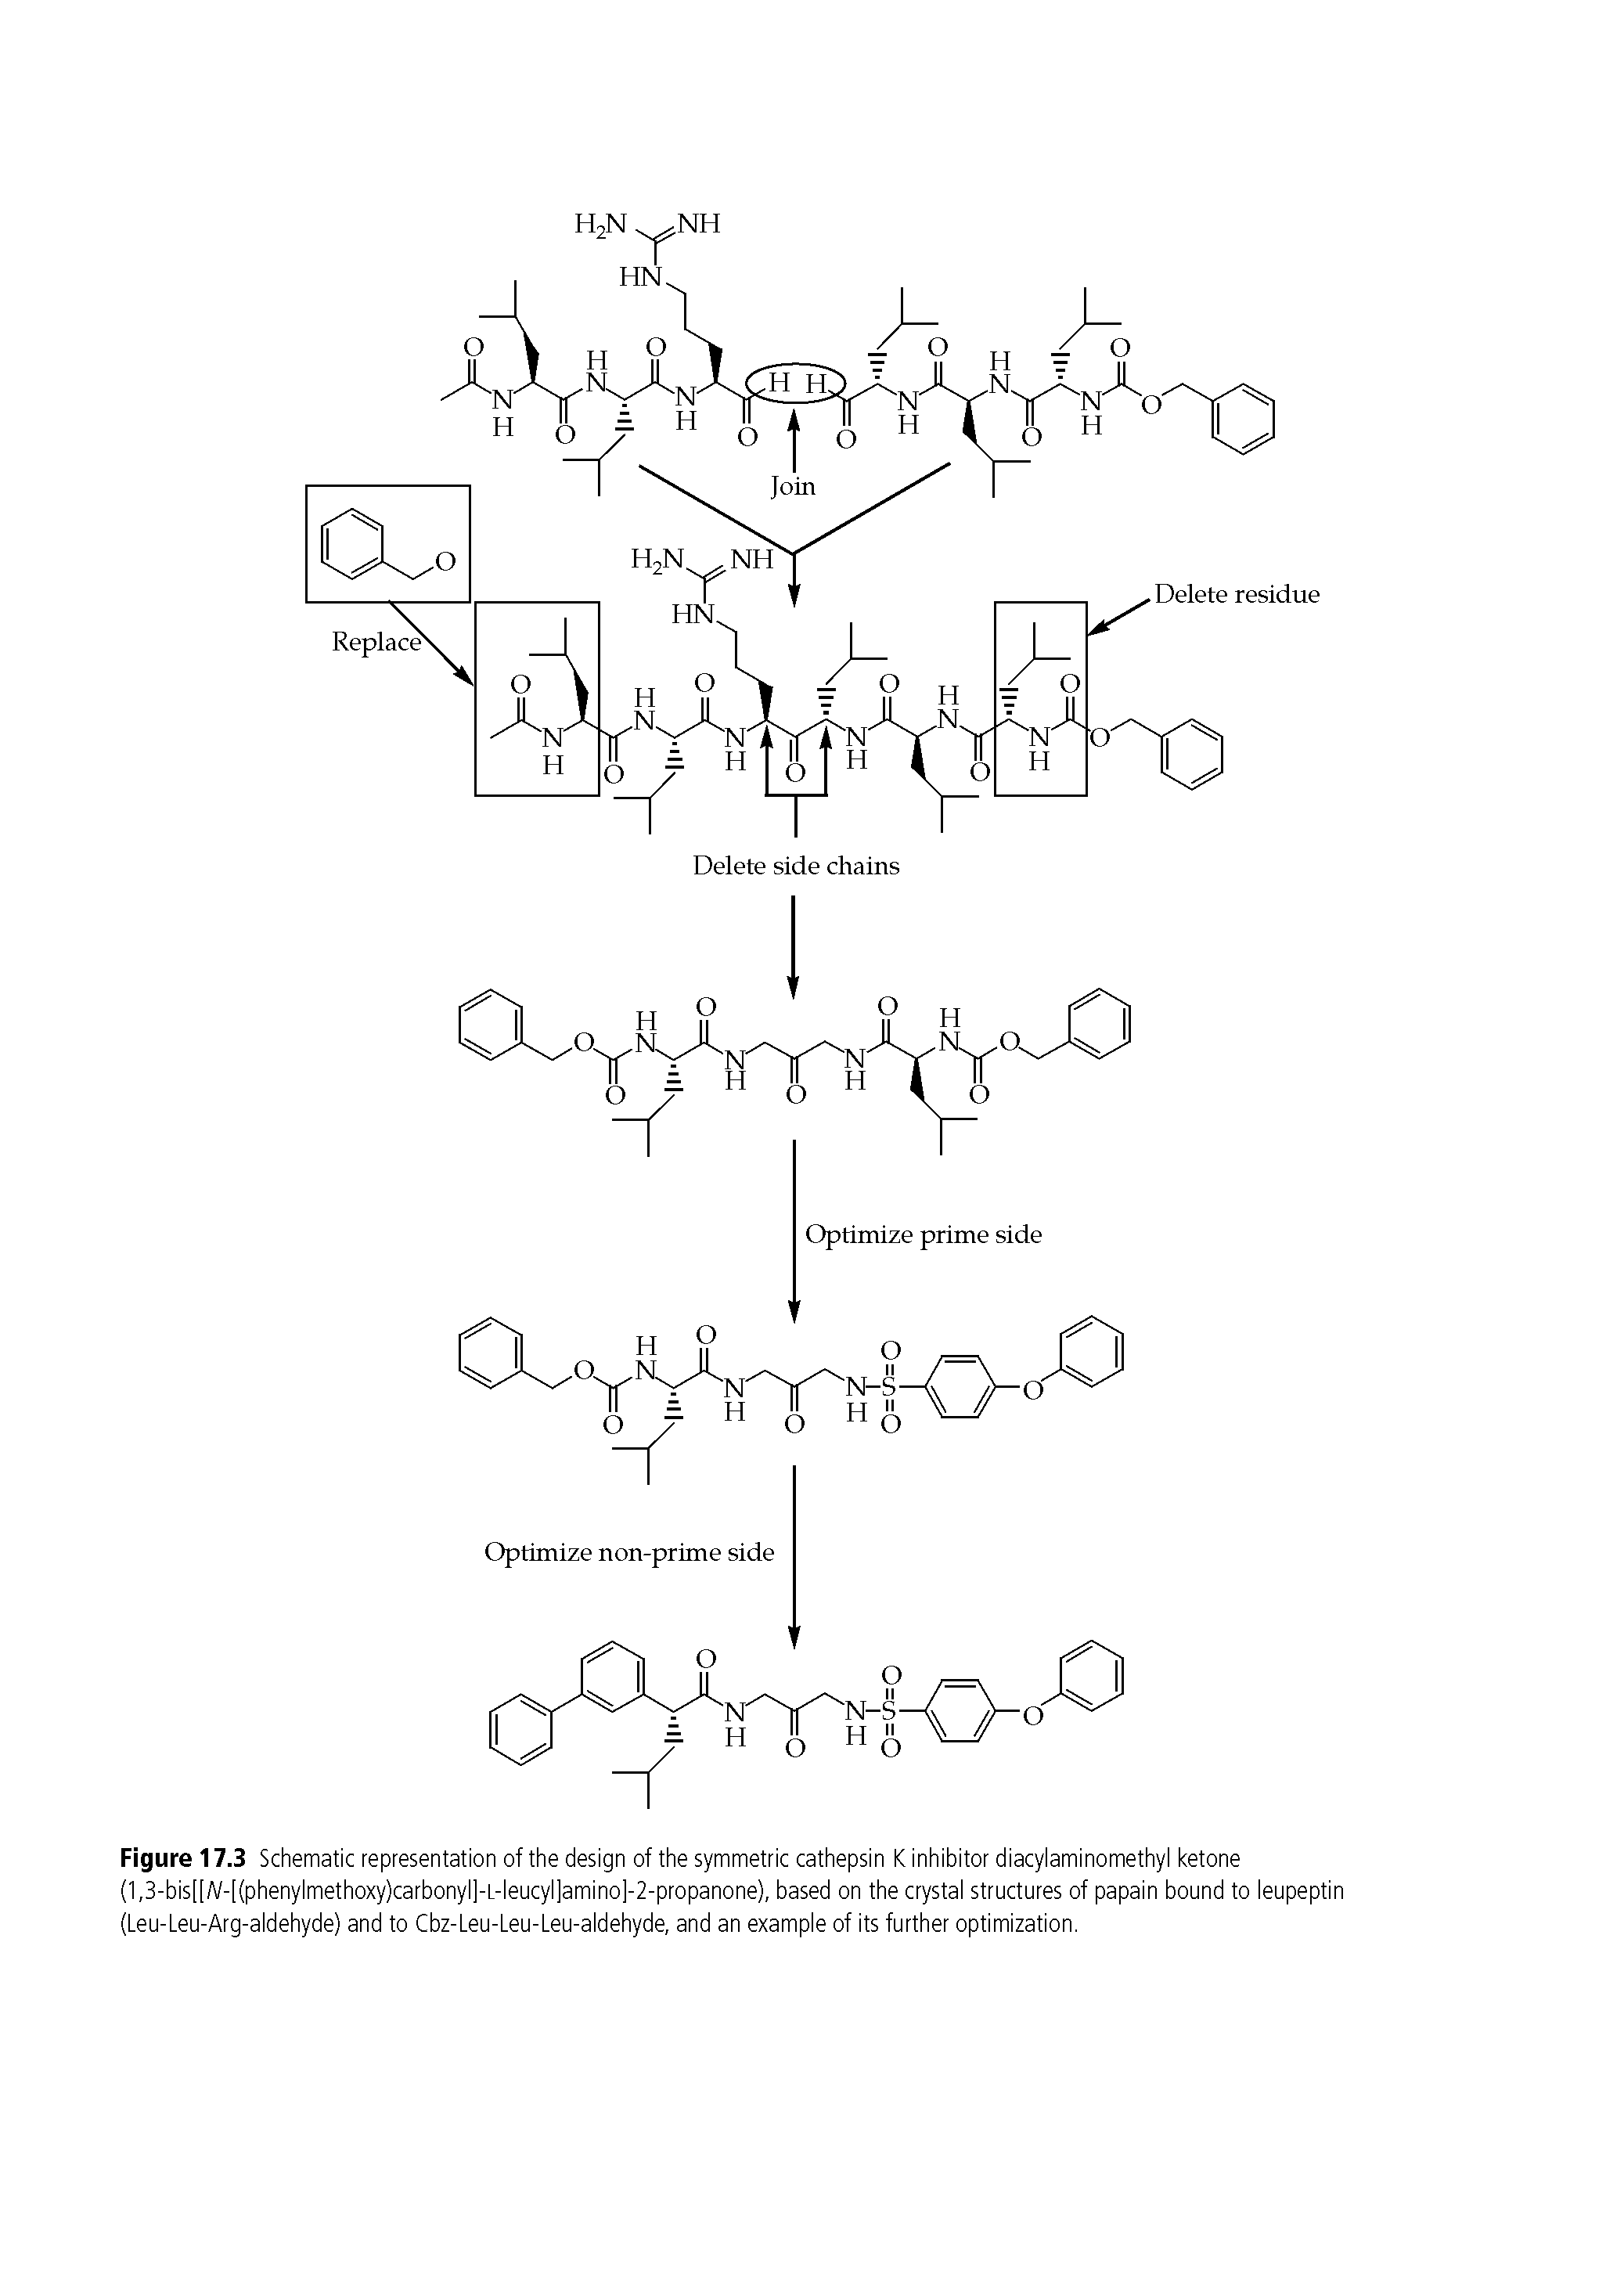 Figure 17.3 Schematic representation of the design of the symmetric cathepsin K inhibitor diacylaminomethyl ketone (1,3-bis[[A/-[(phenylmethoxy)carbonyl]-L-leucyl]amino]-2-propanone), based on the crystal structures of papain bound to leupeptin (Leu-Leu-Arg-aldehyde) and to Cbz-Leu-Leu-Leu-aldehyde, and an example of its further optimization.